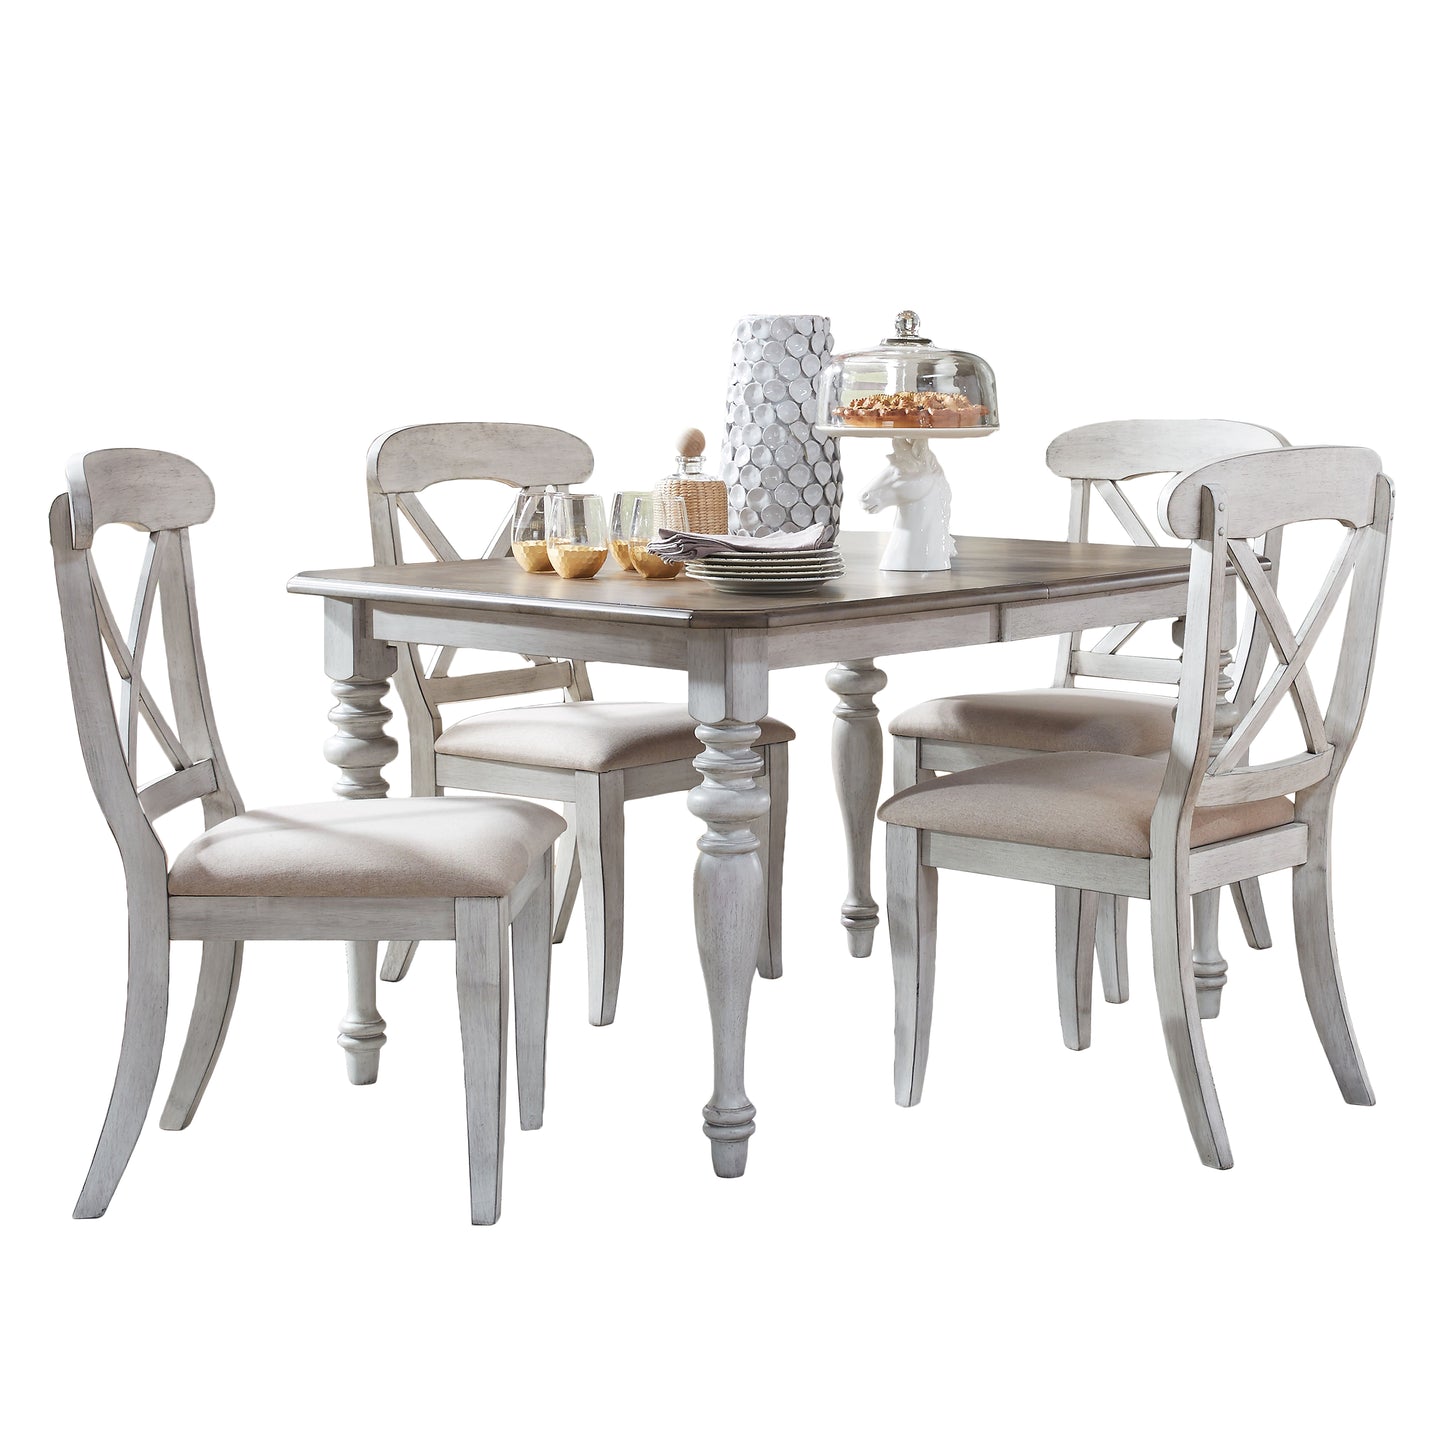 Chandria Dining Set - Extendable Rectangular Table with 4 Chairs in Antique White and Weathered Pine Finish